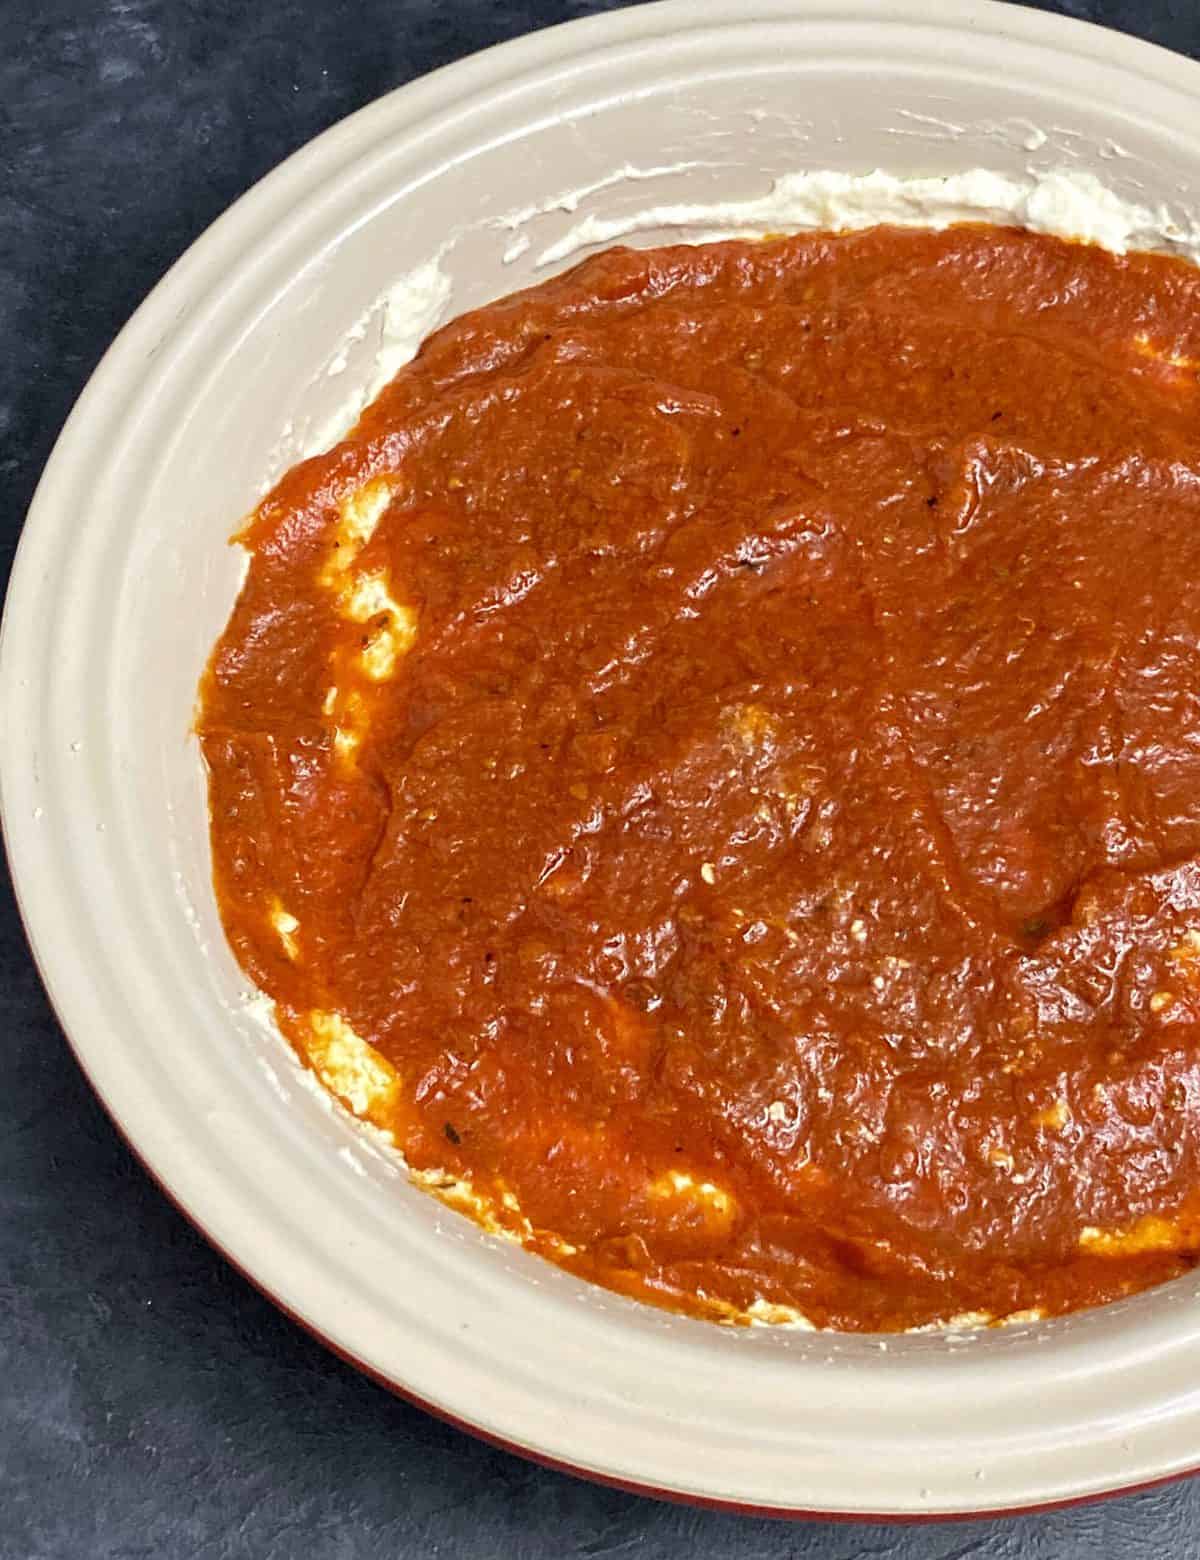 Layers of cream cheese covered in tomato sauce in a baking dish.